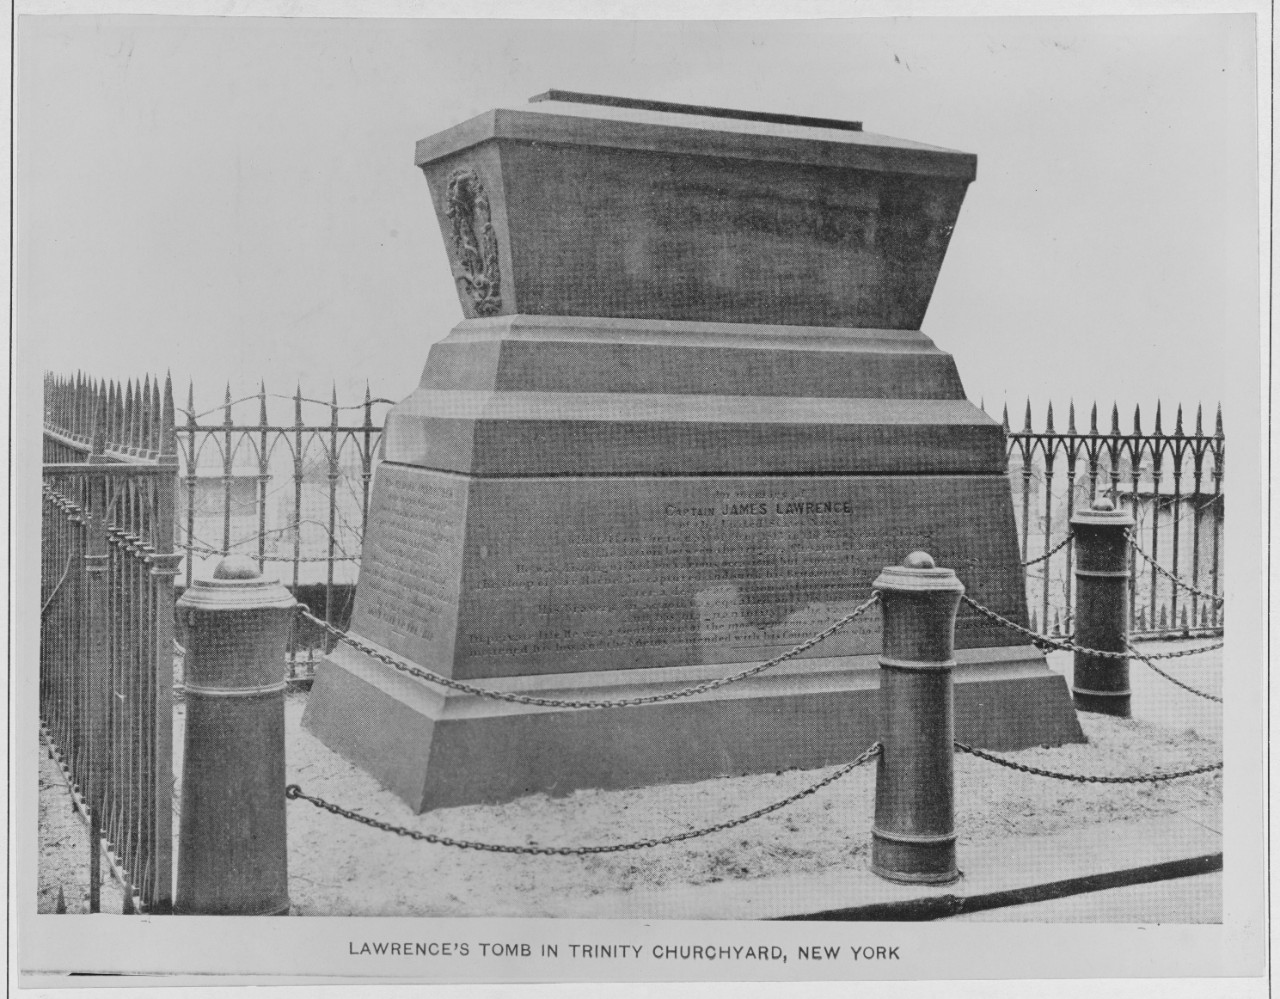 Captain James Lawrence Tomb